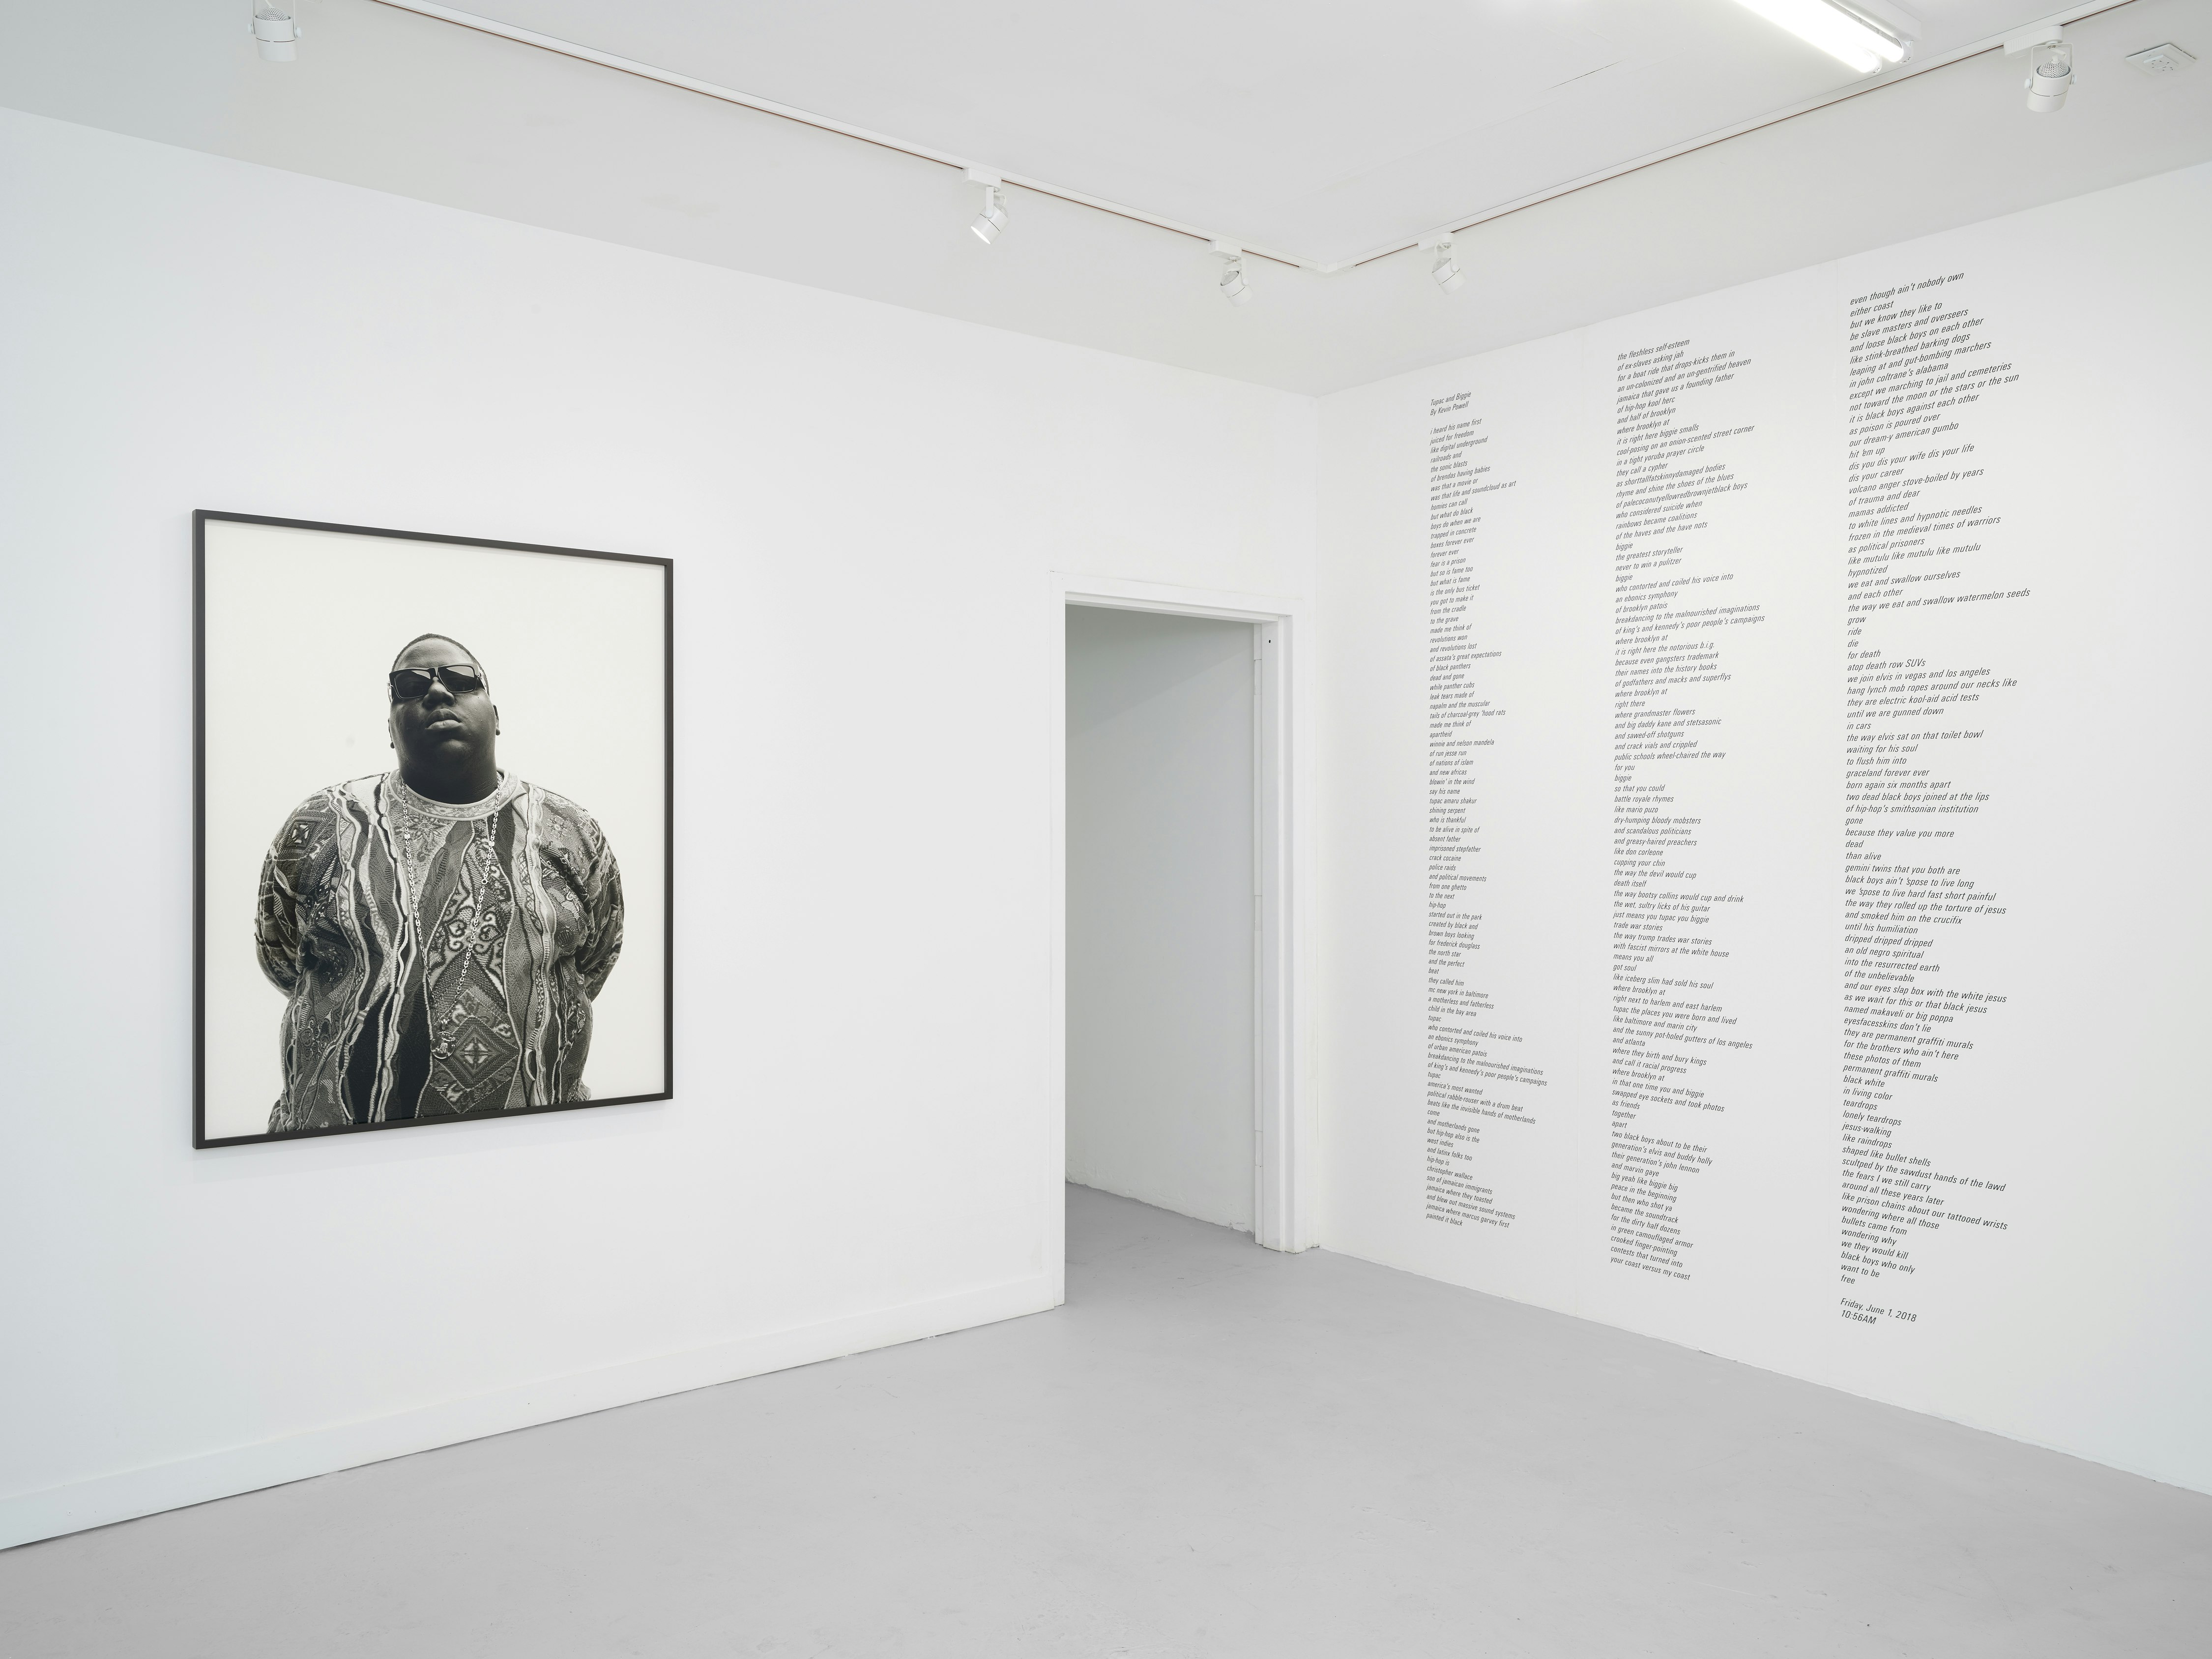 An installation view of Dana Lixenberg's American Images, featuring a photo of Biggie Smalls